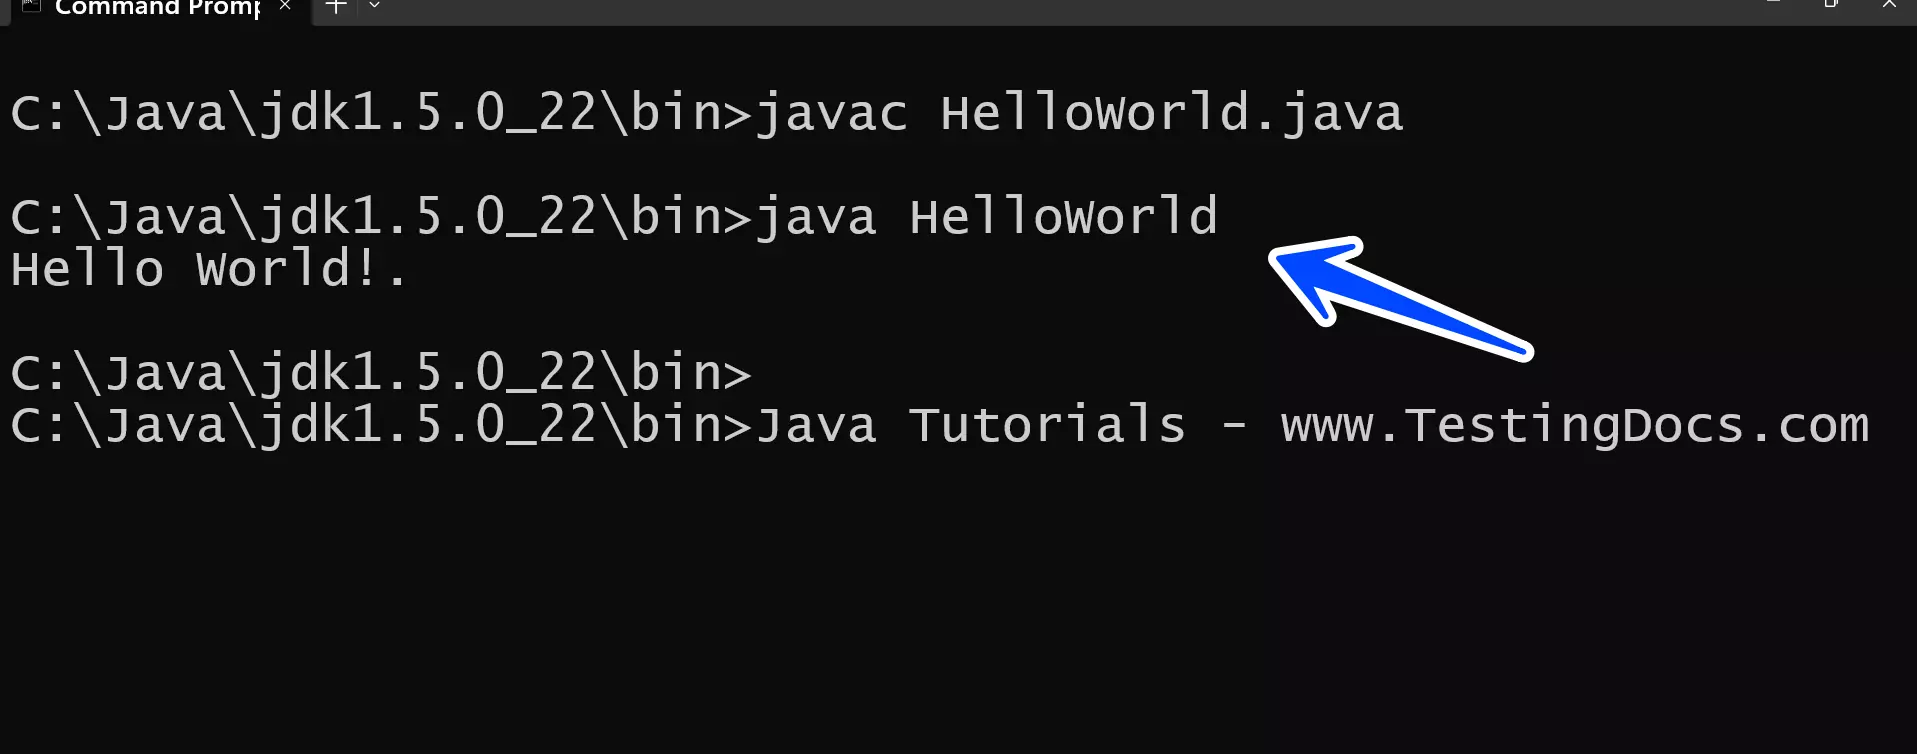 The java launcher command